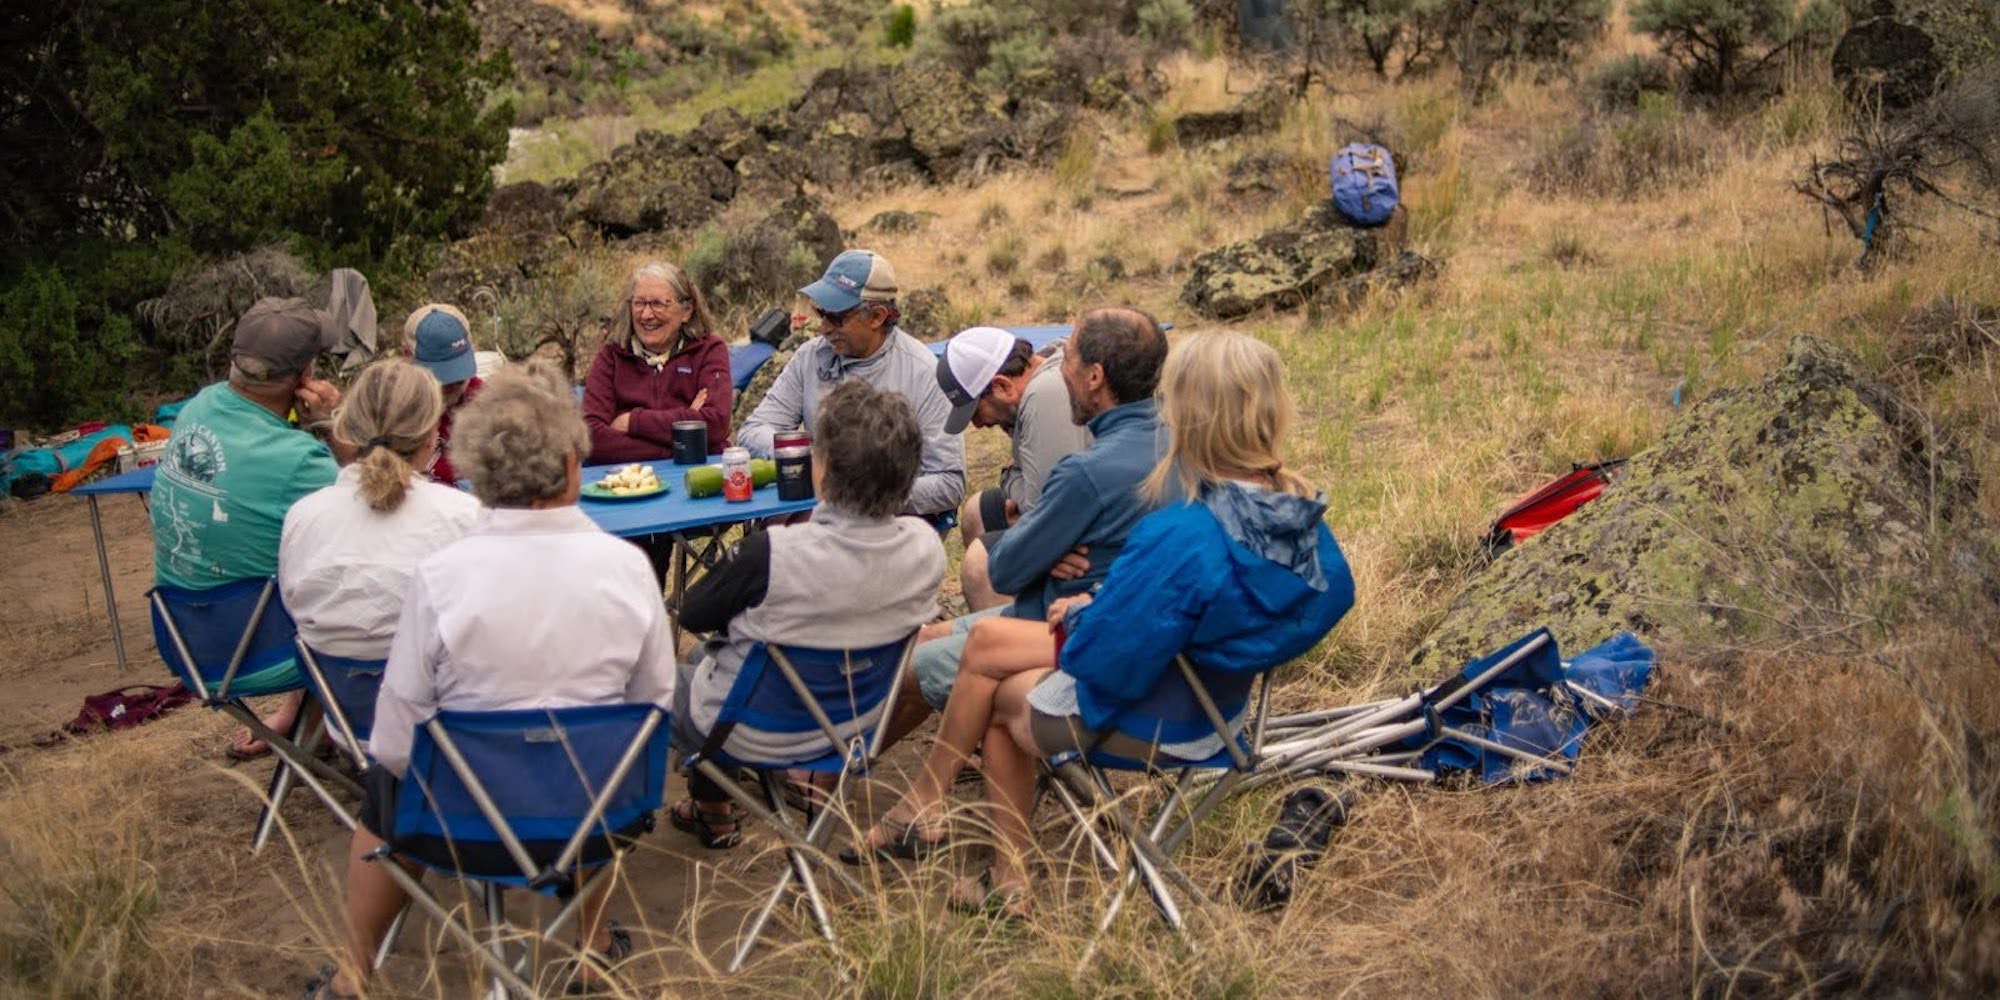 People camping gathered around a table laughing together